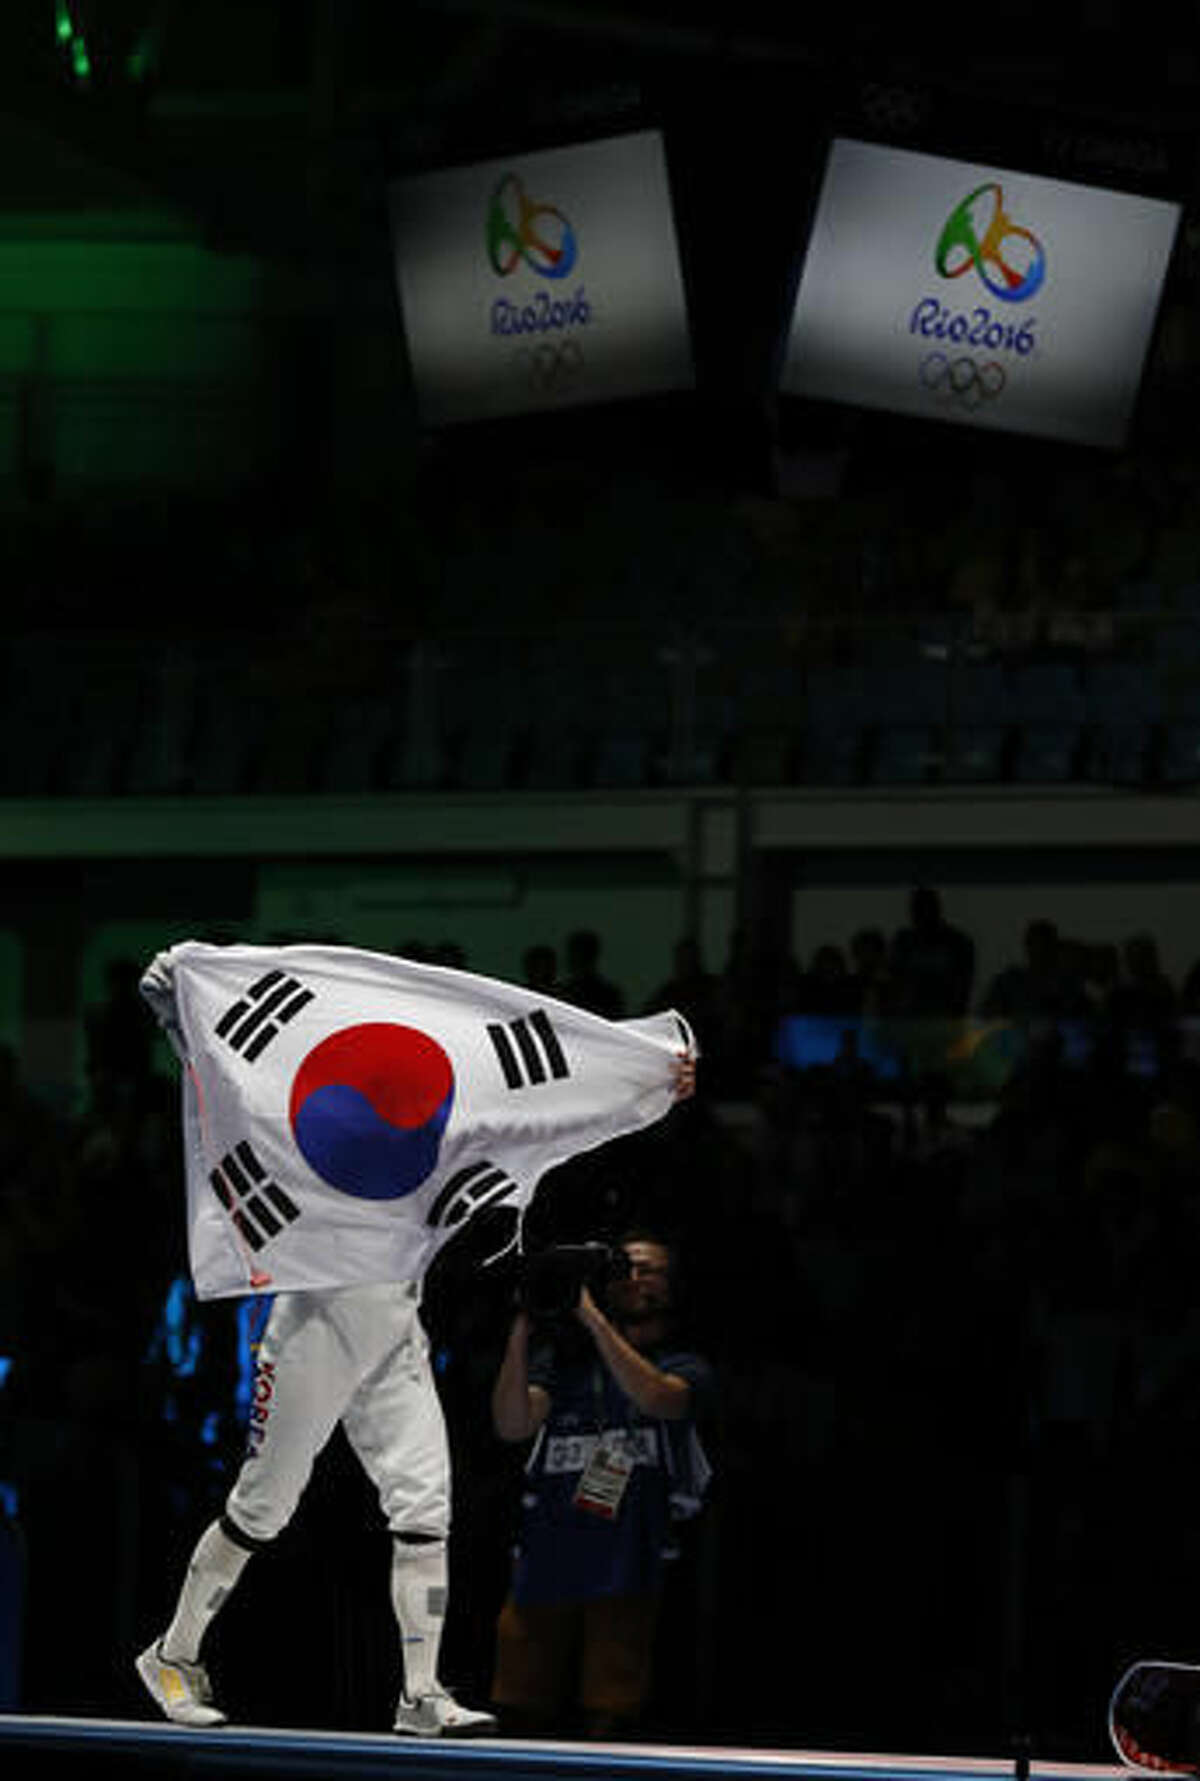 Park Sang-young from South Korea celebrate after defeated Geza Imre from Hungary in the men's epee individual fencing event at the 2016 Summer Olympics in Rio de Janeiro, Brazil, Tuesday, Aug. 9, 2016. (AP Photo/Vincent Thian)